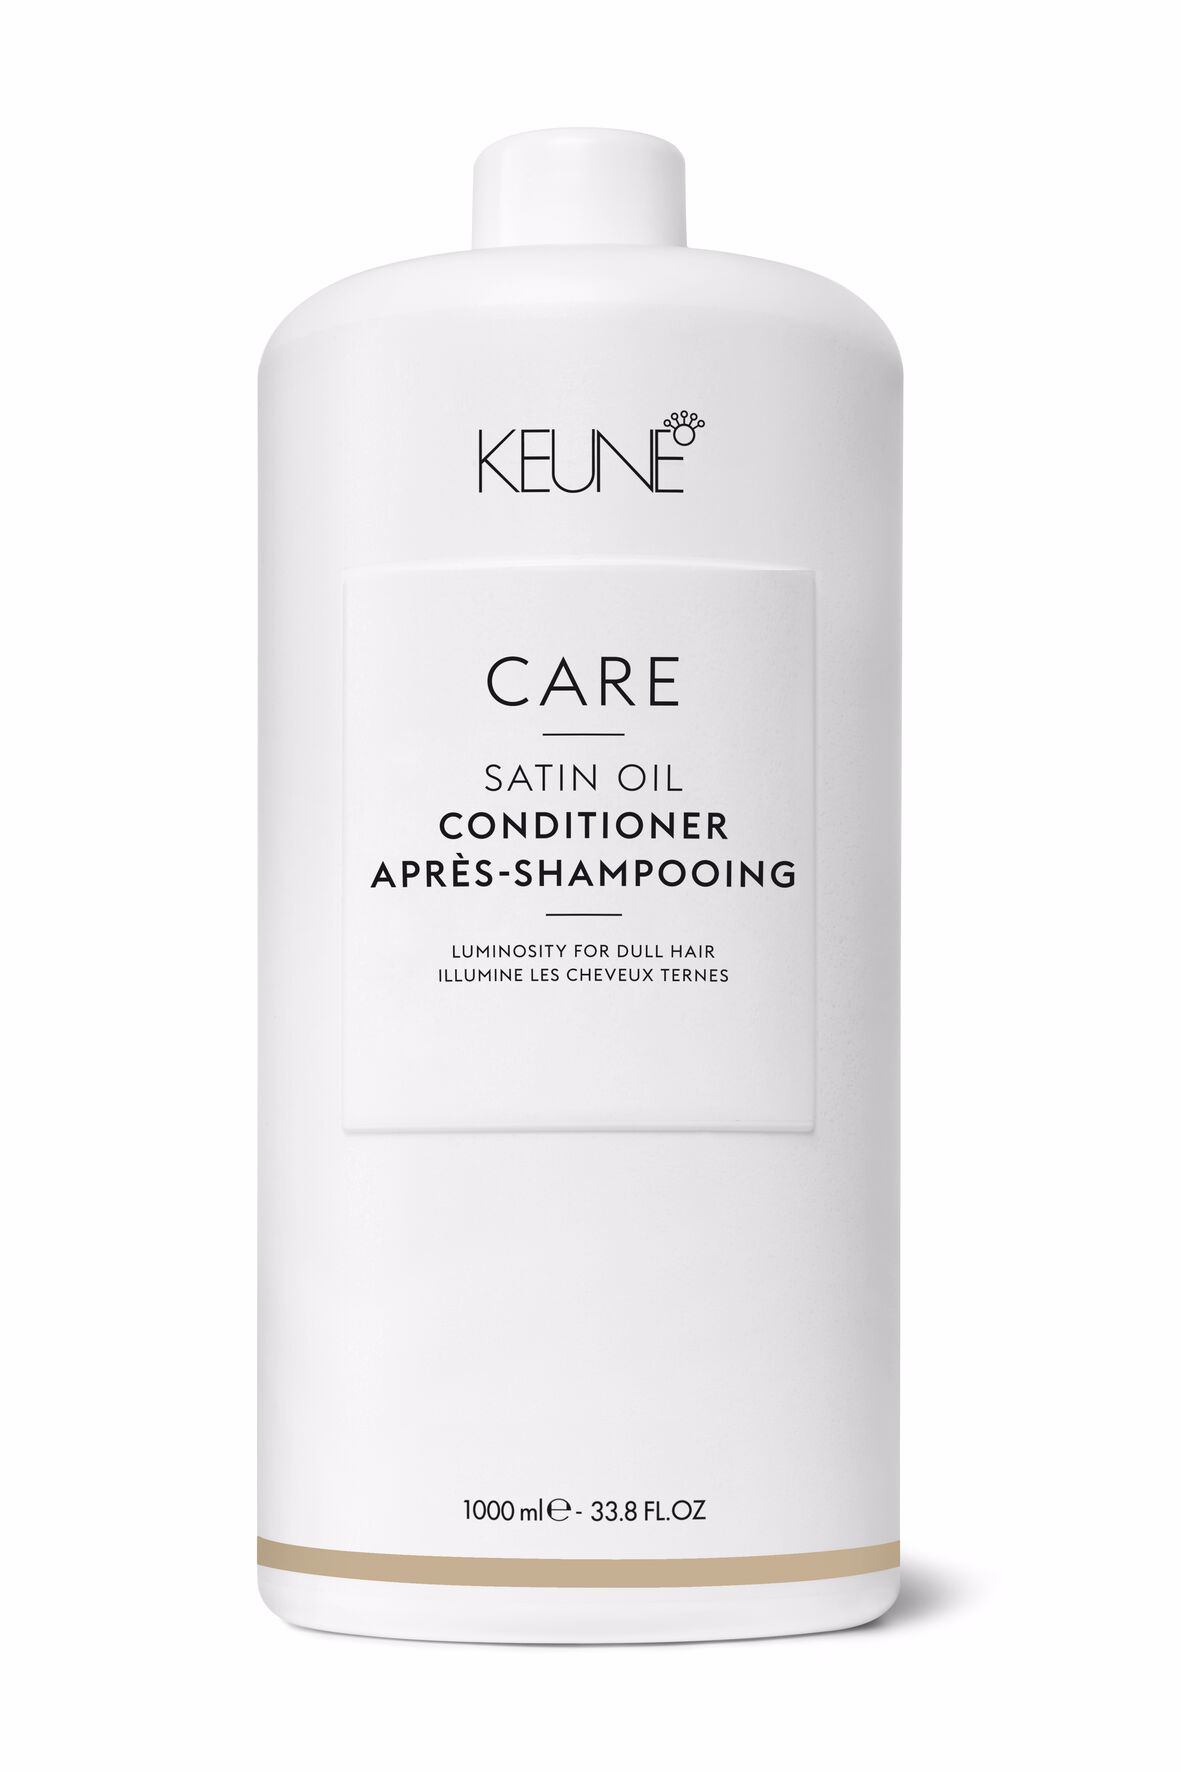 Satin Oil Conditioner is the ideal hairproduct for dry, dull hair. Thanks to its innovative, lightweight formula, your hair will shine with a fresh, healthy, and glossy appearance. Keune.ch.